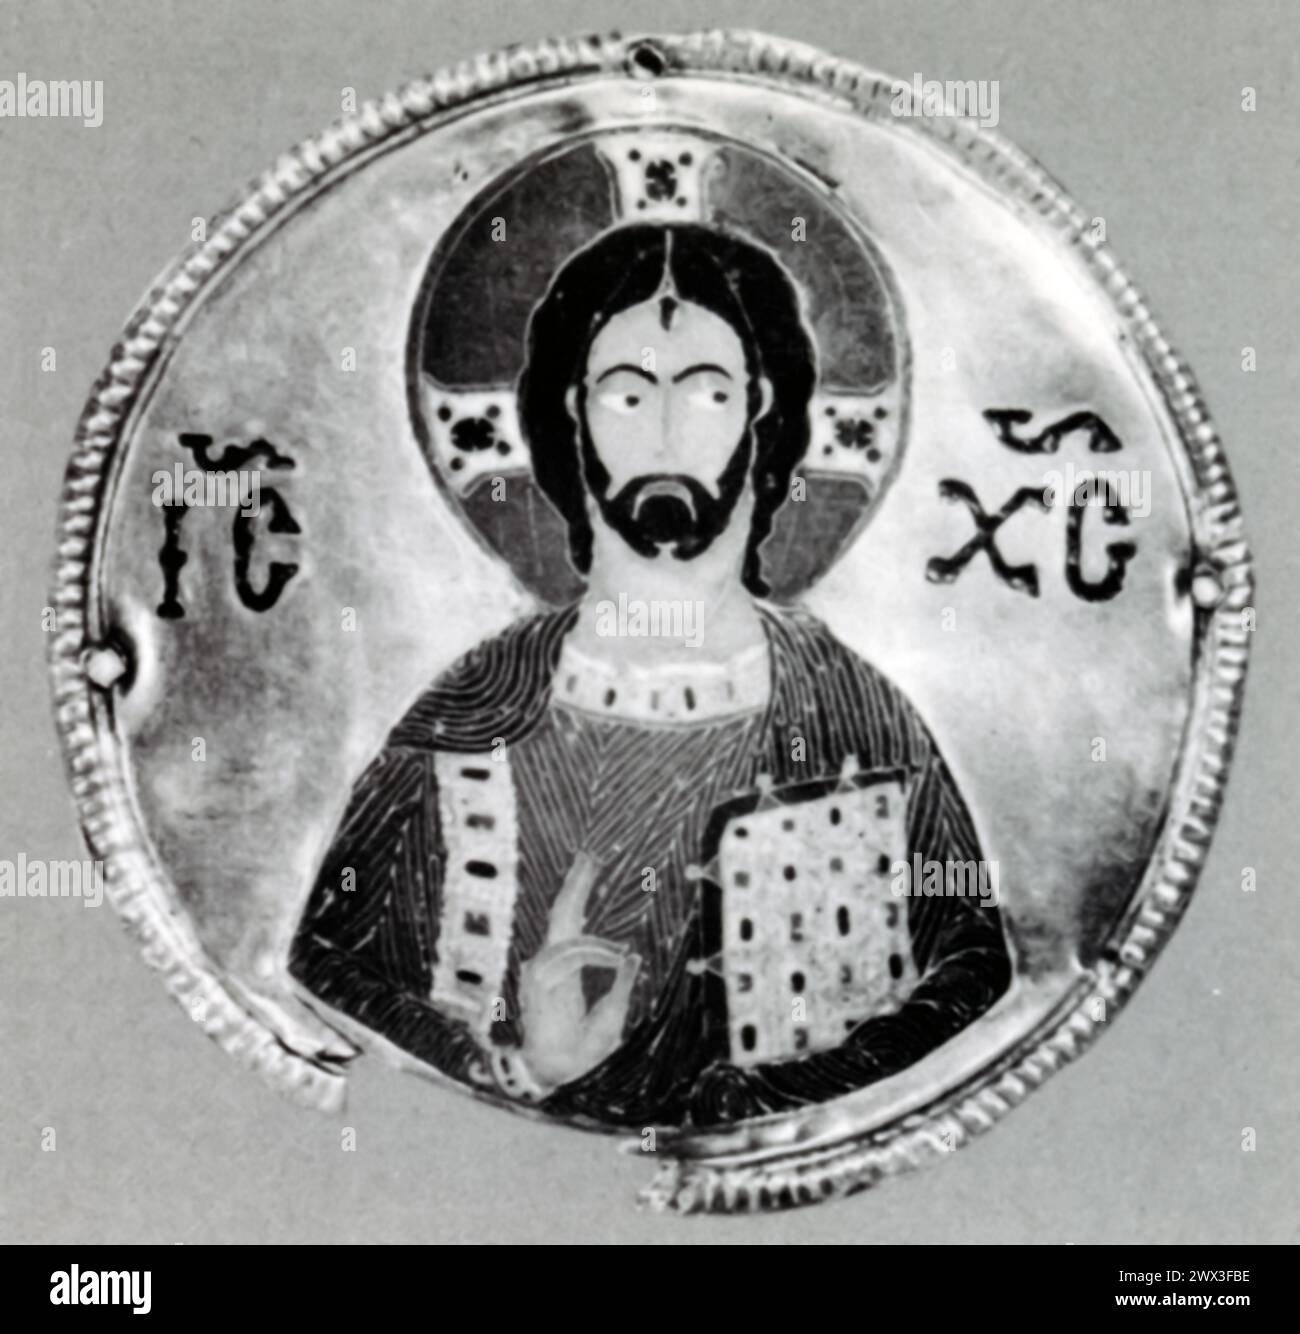 A detail of Christ, a piece of cloisonné enamel on gold from the Byzantine period, specifically the 11th century, originating from Djumati, Georgia. Cloisonné, a technique used for decorative purposes in metalwork, involves creating compartments (cloisons) with metal wires or strips placed on a metal object and filling these compartments with enamel paste. The object is then fired, allowing the enamel to melt and fill the cloisons, and polished to reveal a vibrant, intricate design upon cooling. Stock Photo